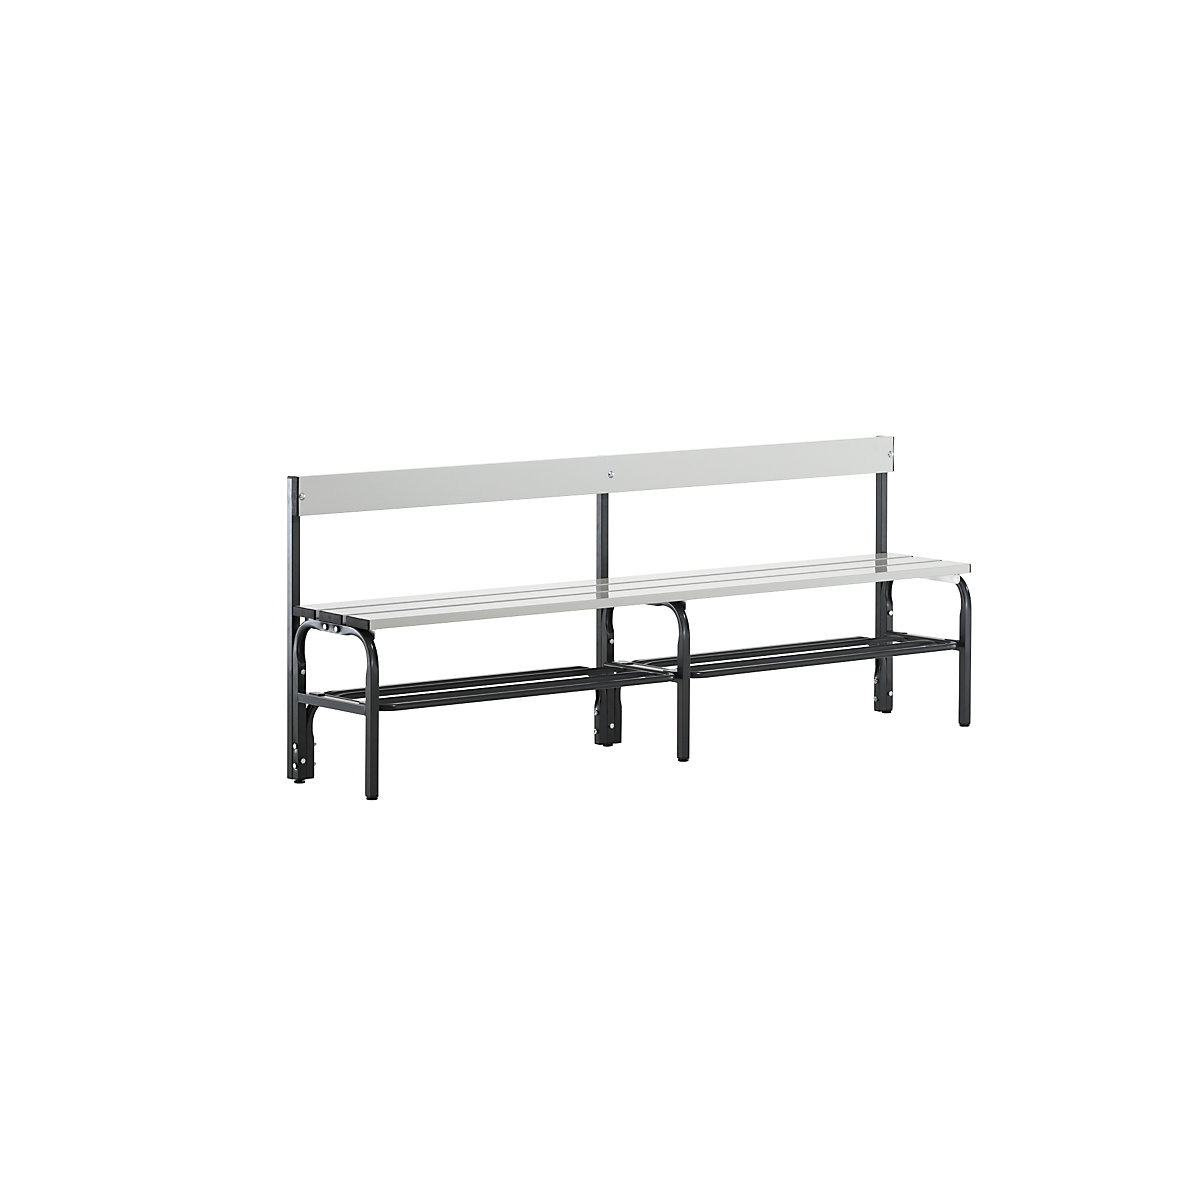 Sypro – Half height cloakroom bench with back rest, single-sided, aluminium, length 2000 mm, charcoal, shoe rack